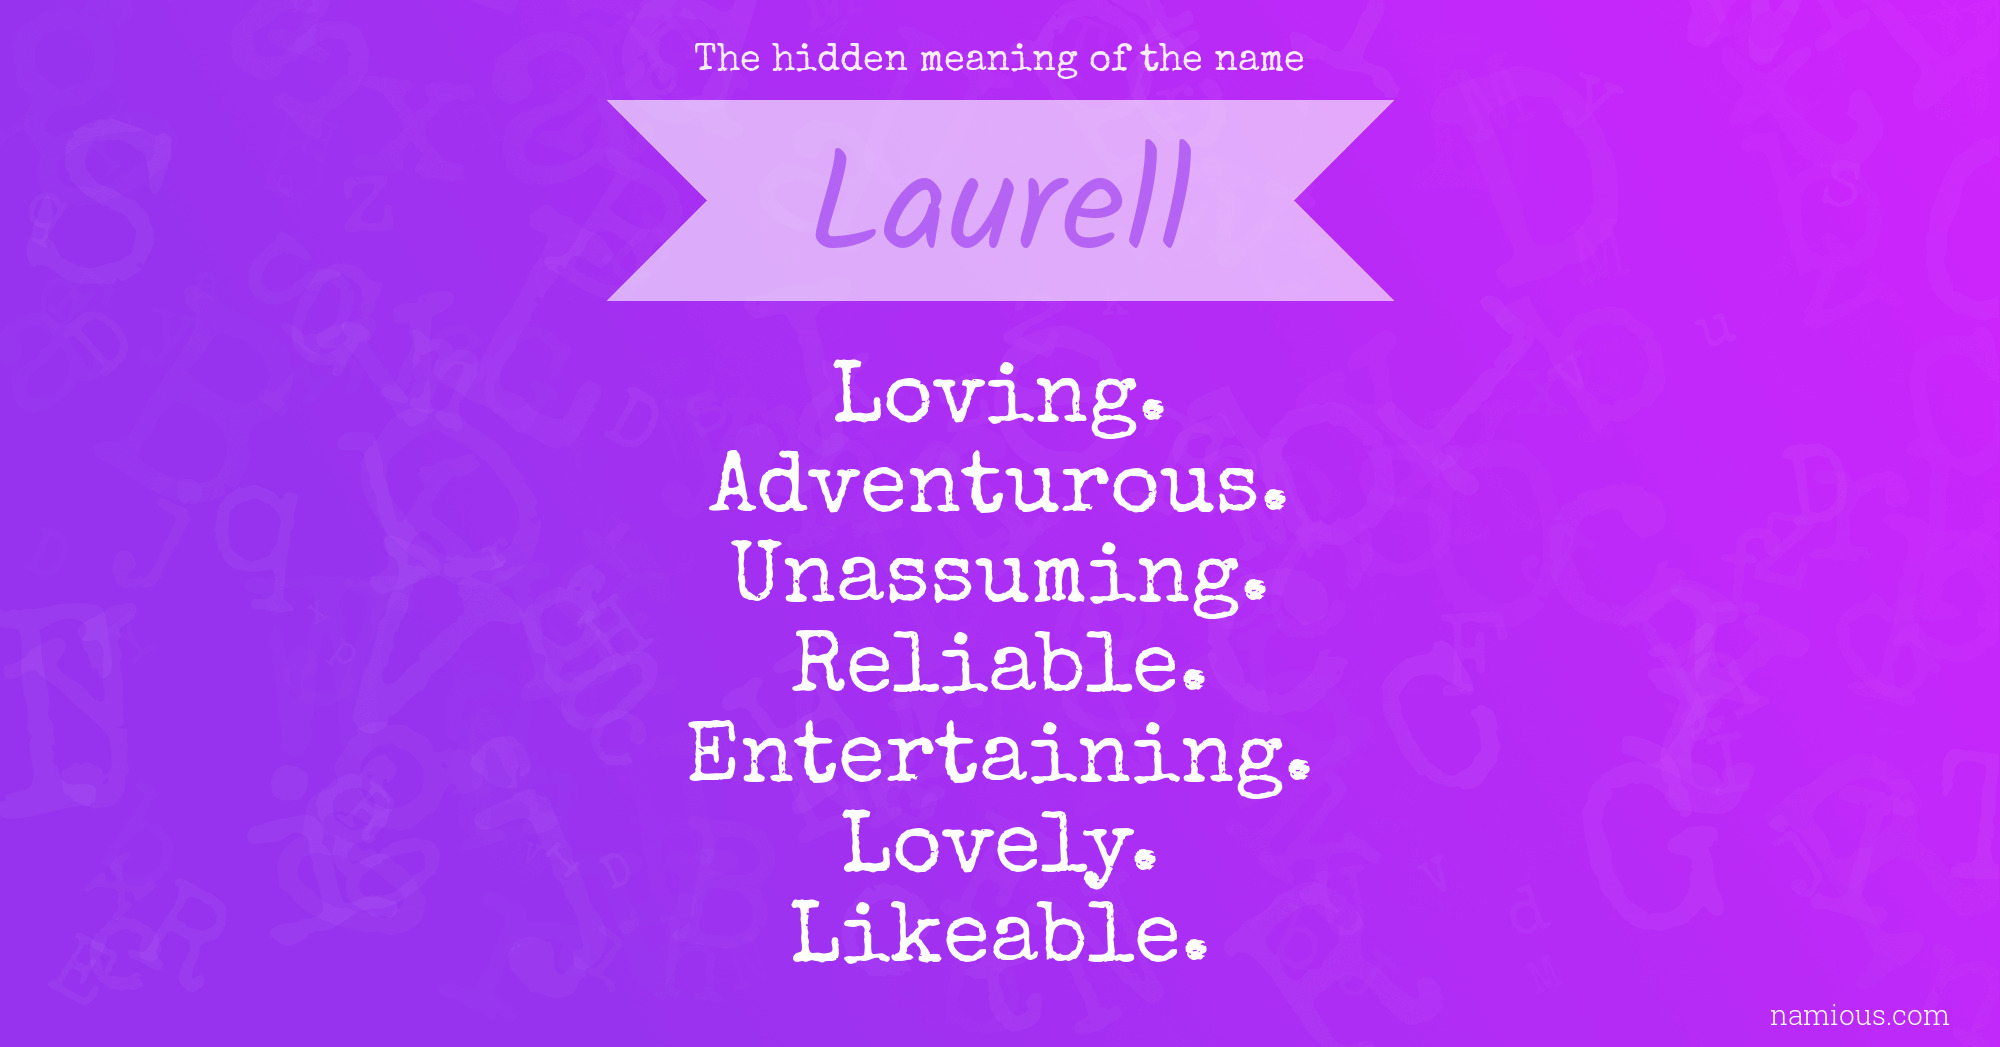 The hidden meaning of the name Laurell